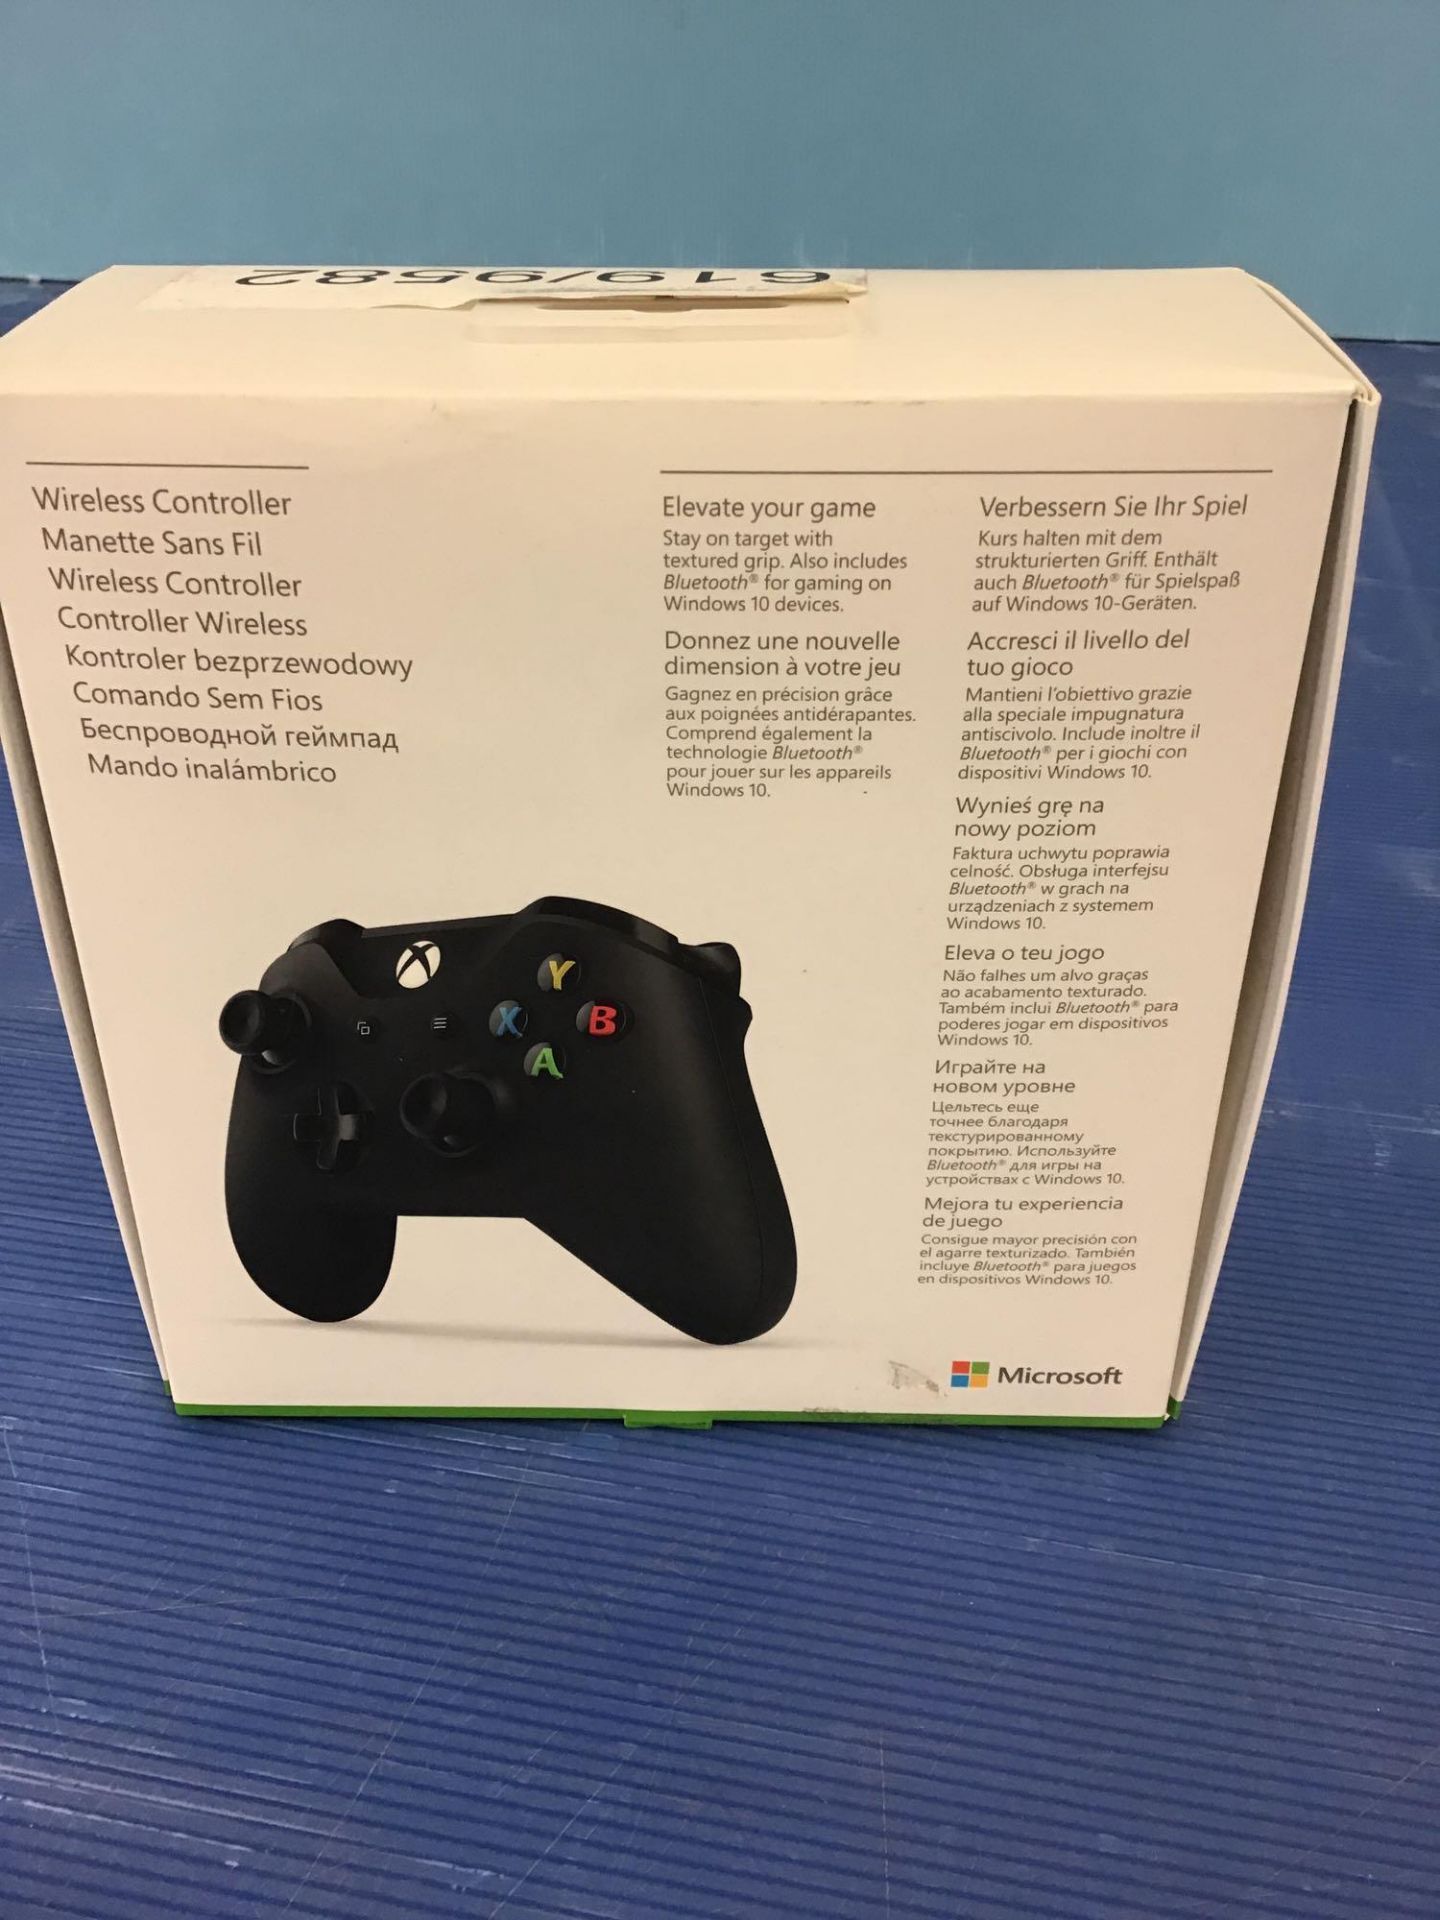 Official Xbox One Wireless Controller 3.5mm - Black, £49.99 RRP - Image 2 of 5